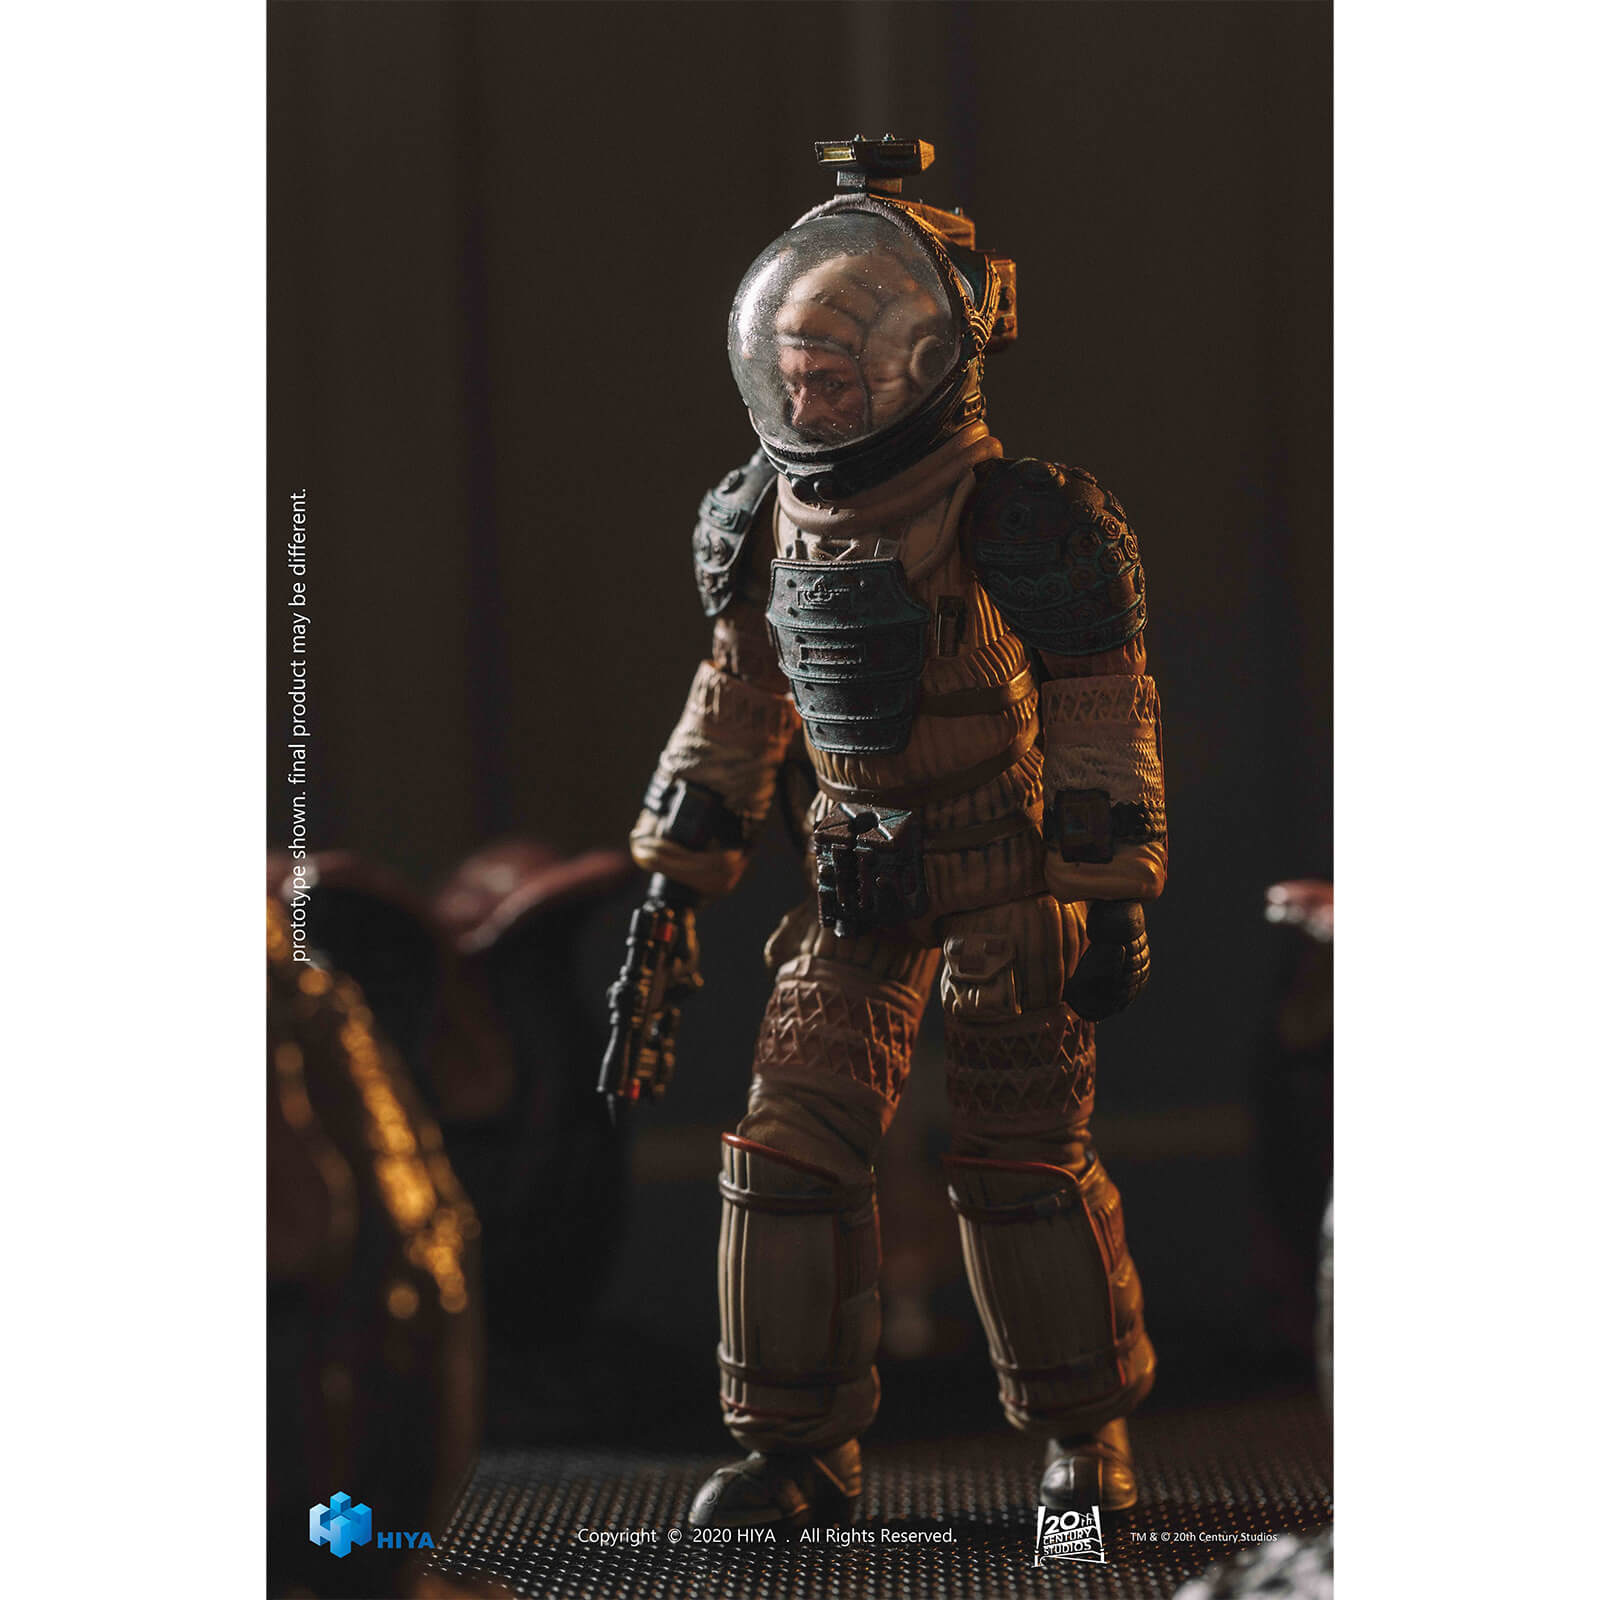 HIYA Toys Alien Exquisite Mini 1/18 Scale Figure - Kane In Spacesuit